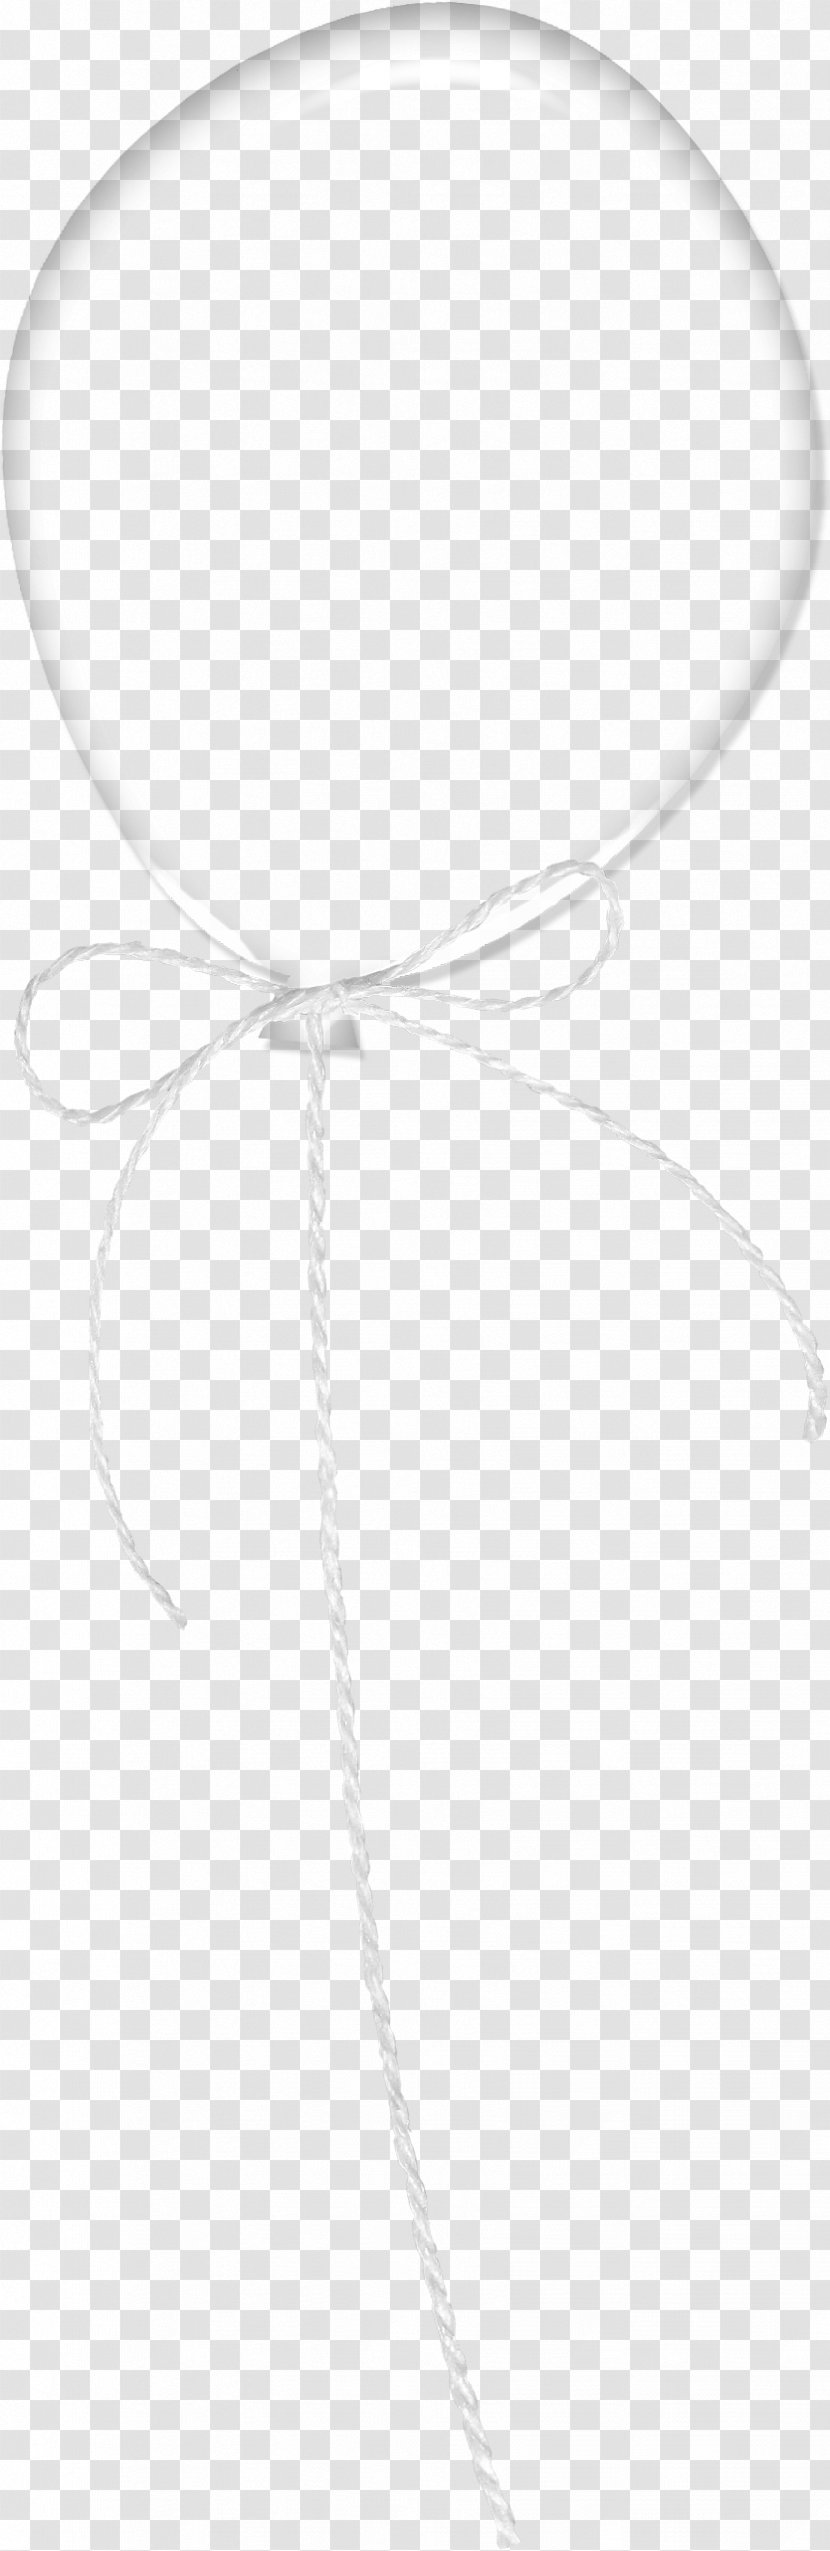 Balloon Rope - Rectangle Transparent PNG